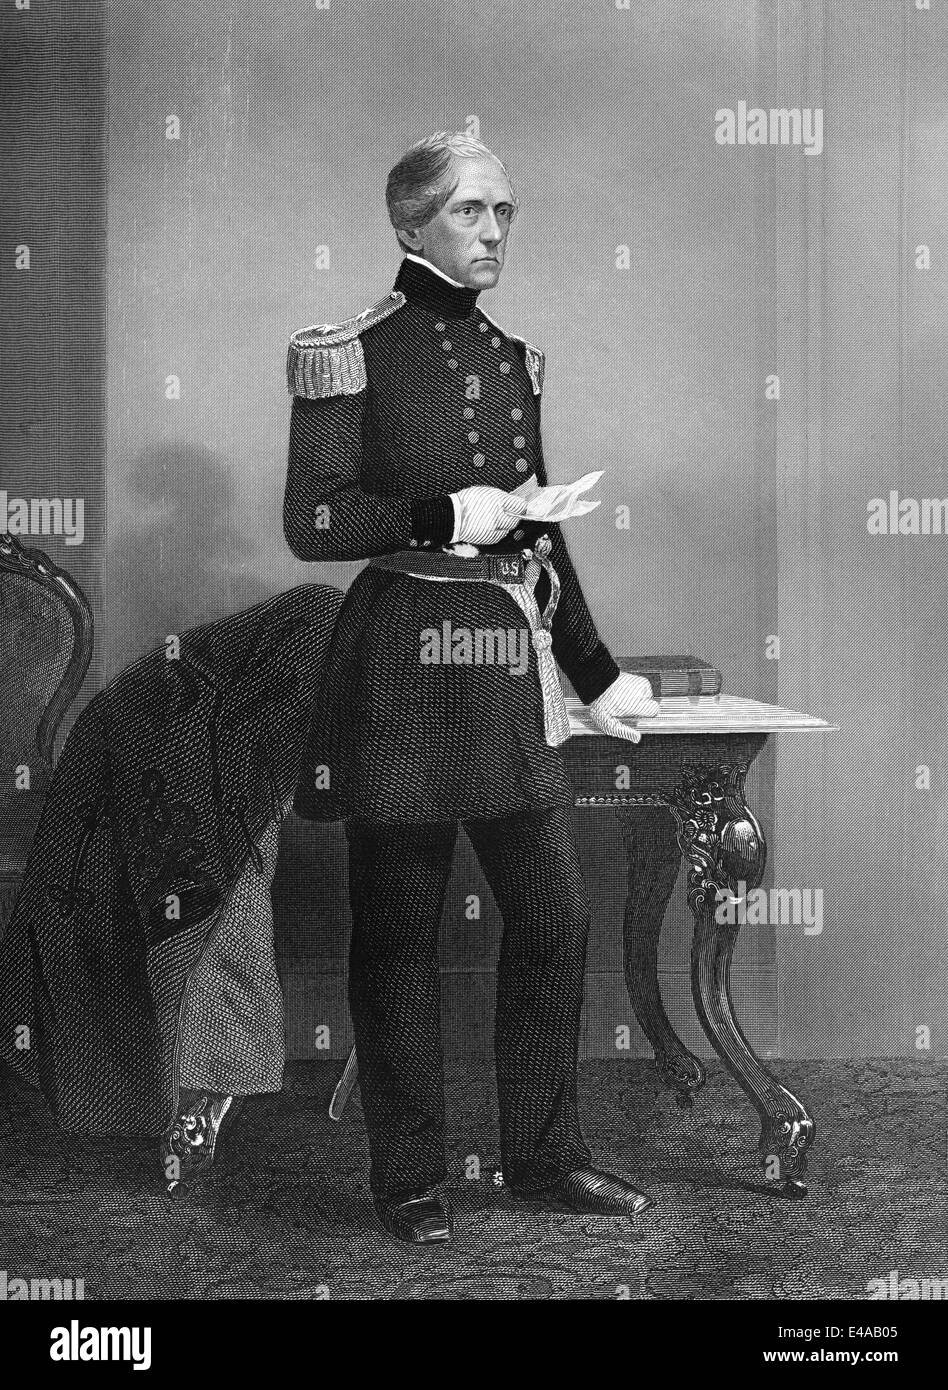 John Ellis Wool, 1784 - 1869, an officer in the United States Army, Stock Photo